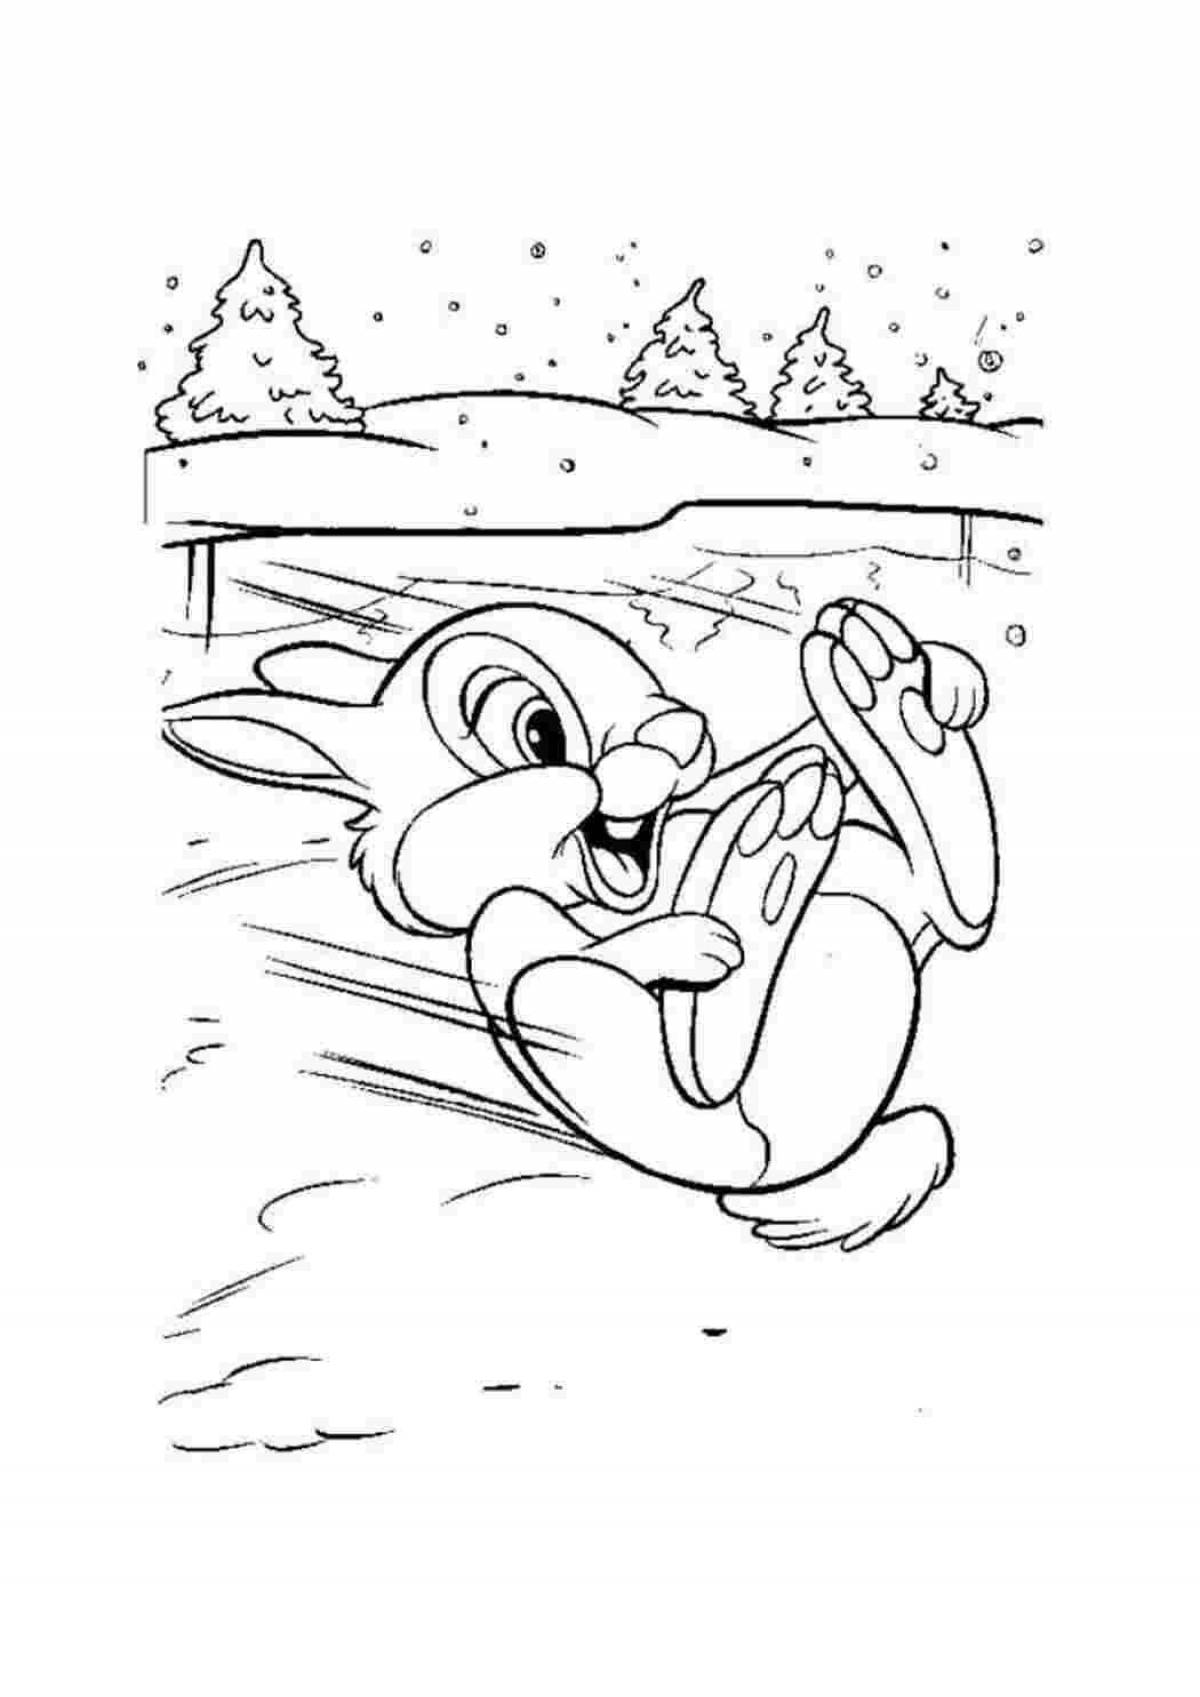 Whimsical rabbit coloring book in winter